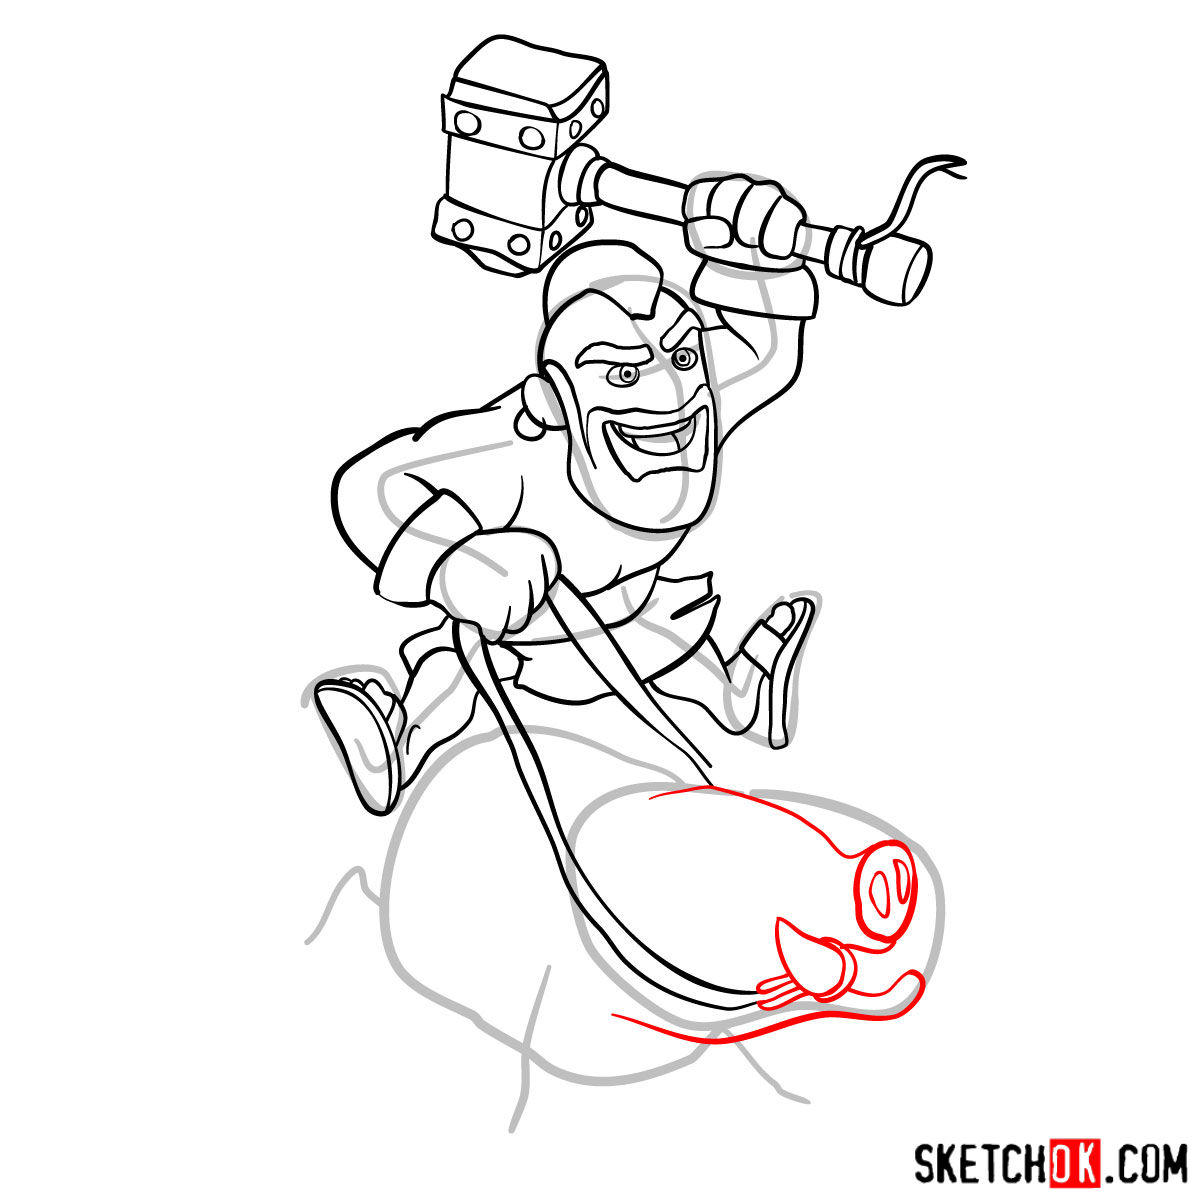 How to draw Hog Rider from Clash of Clans - step 10.